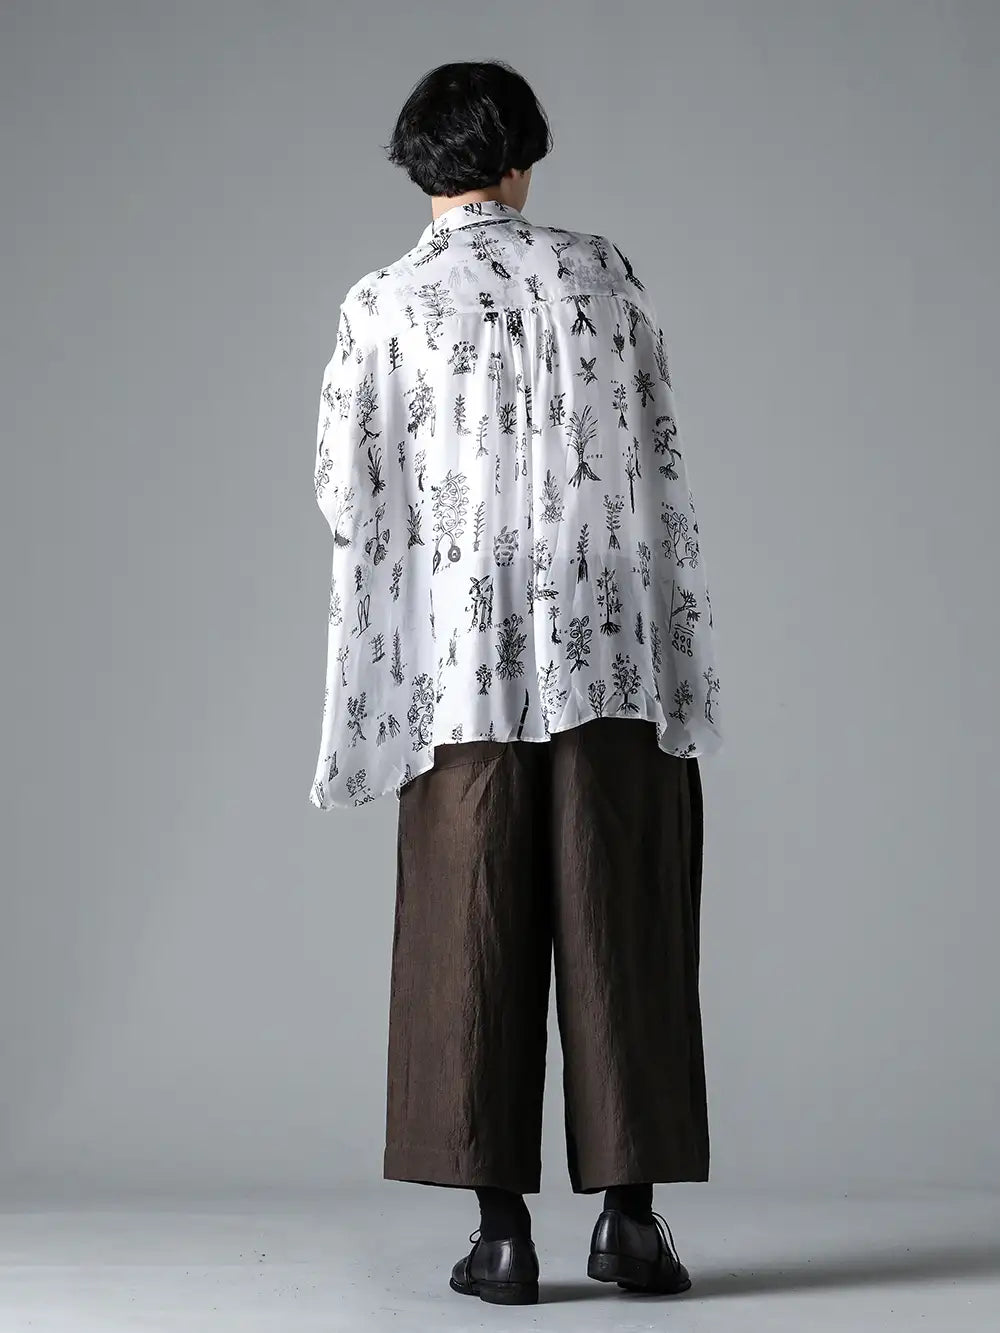 ZIGGY CHEN 24SS - Cropped trouser styles that will be suitable throughout summer. - PTS24M02-2 Chinese Medicine Print LS Shirt - 0M2410509 Pleated Extra Wide Leg Trousers - 992x-black-guidi Classic Derby Shoes Laced Up Single Sole - Horse Full Grain - 992X Black 1-008